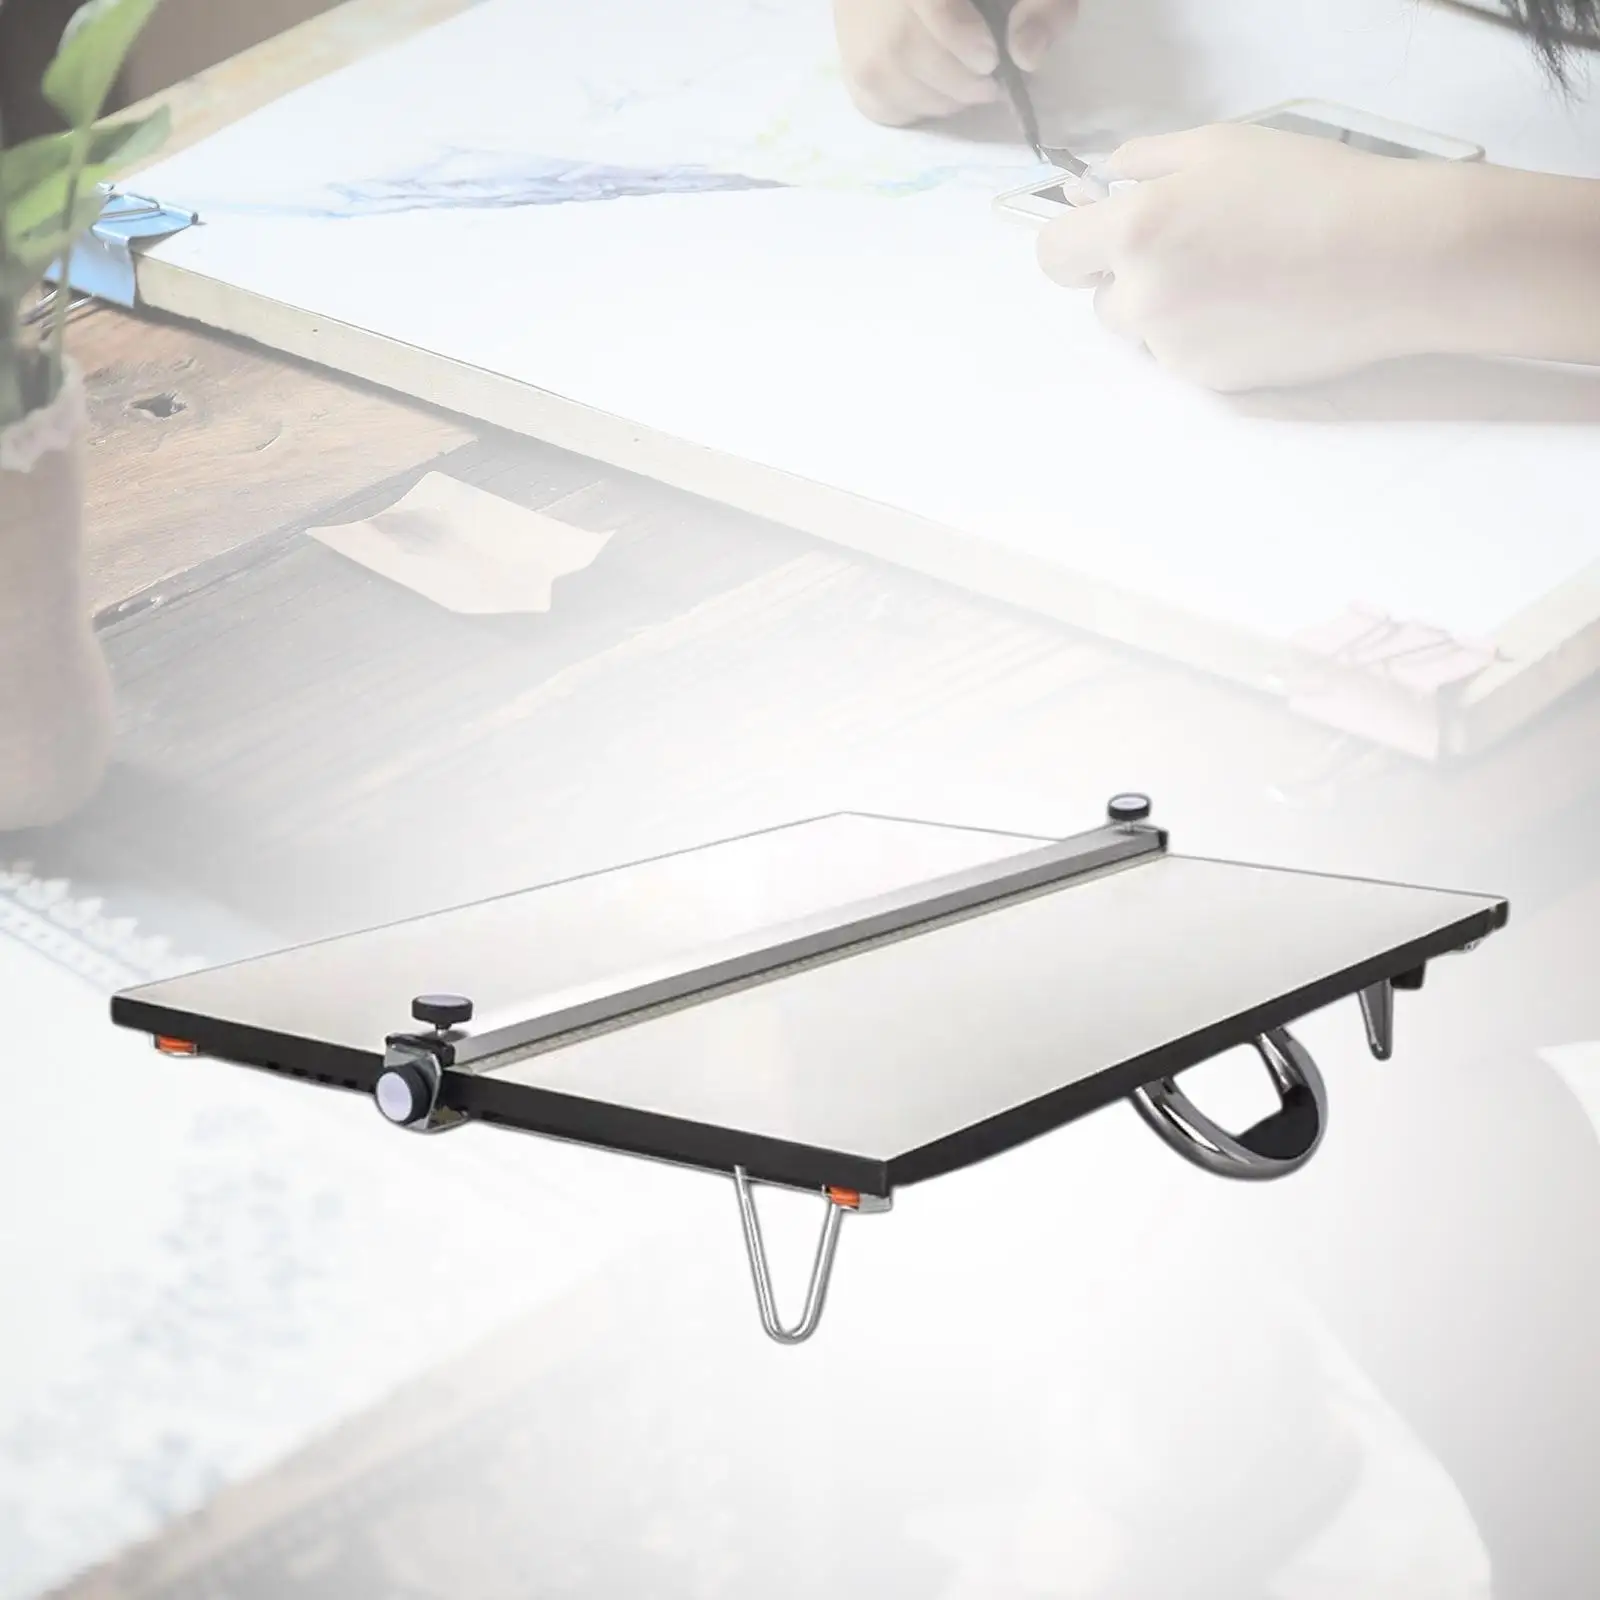 A2 Drawing Board Professional Graphic Sketch with Parallel Bar Support Legs for Artist